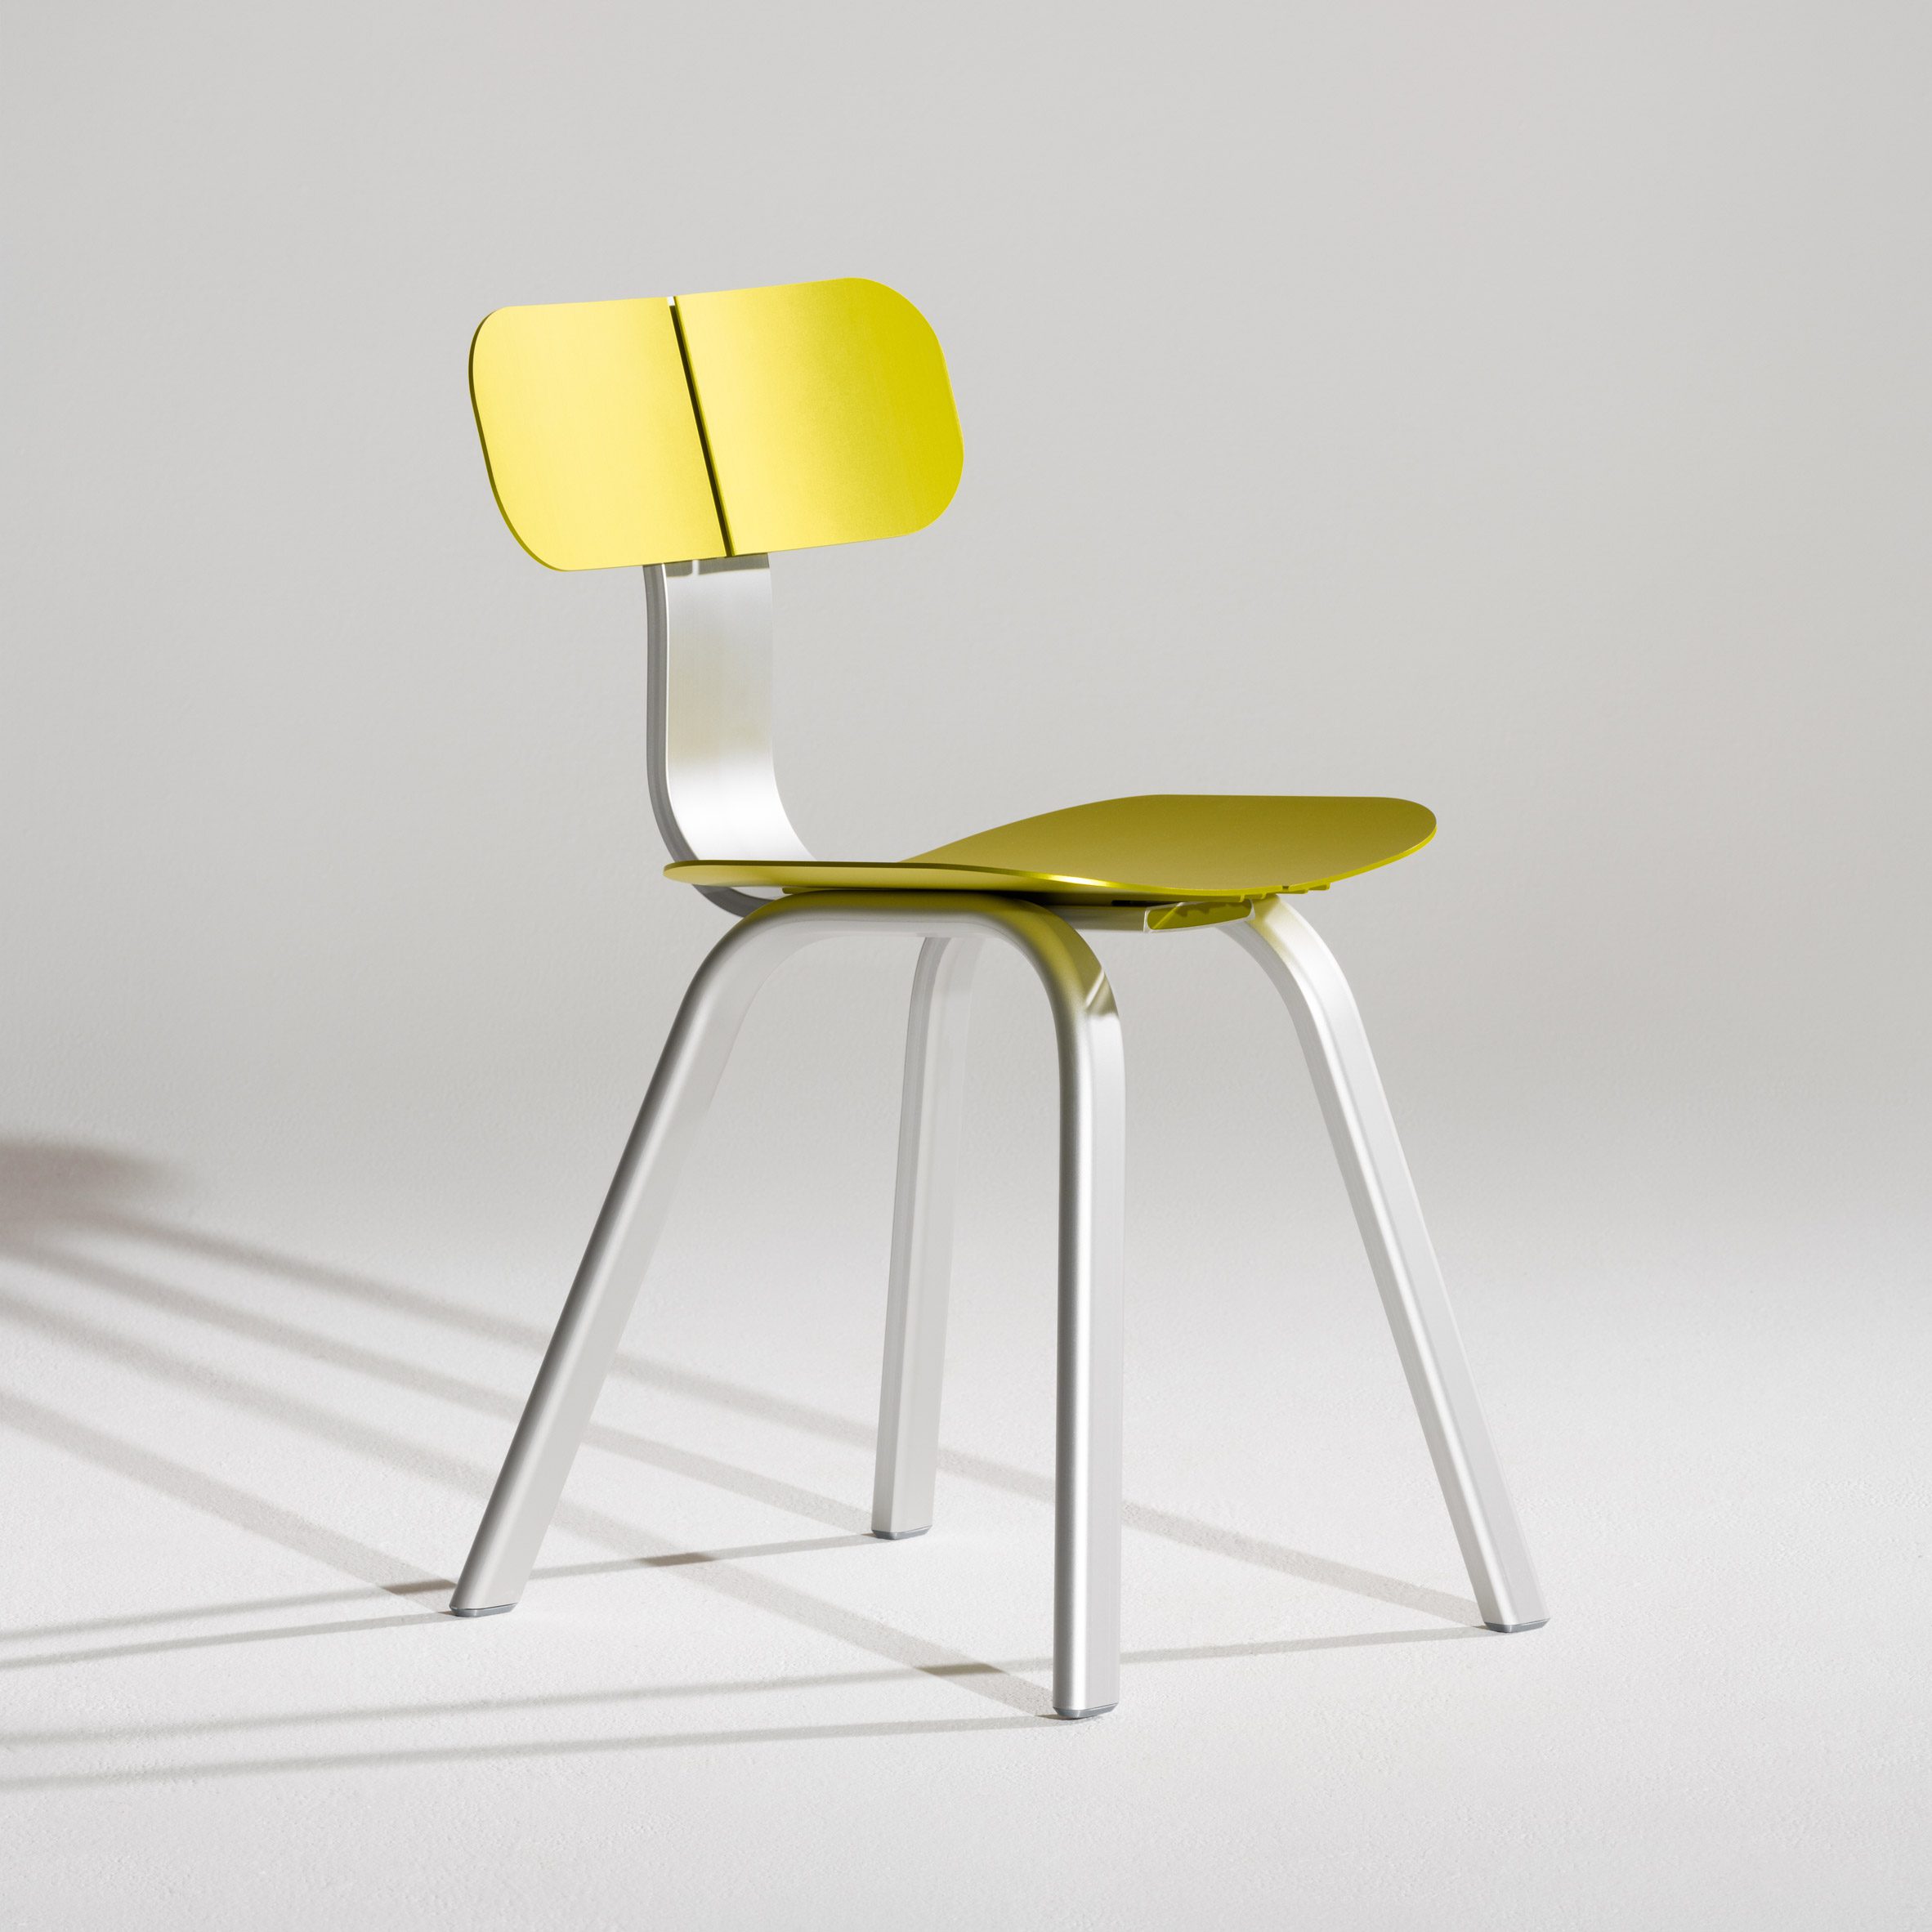 Billet Chair by John Tree for Hydro's 100R aluminium exhibition